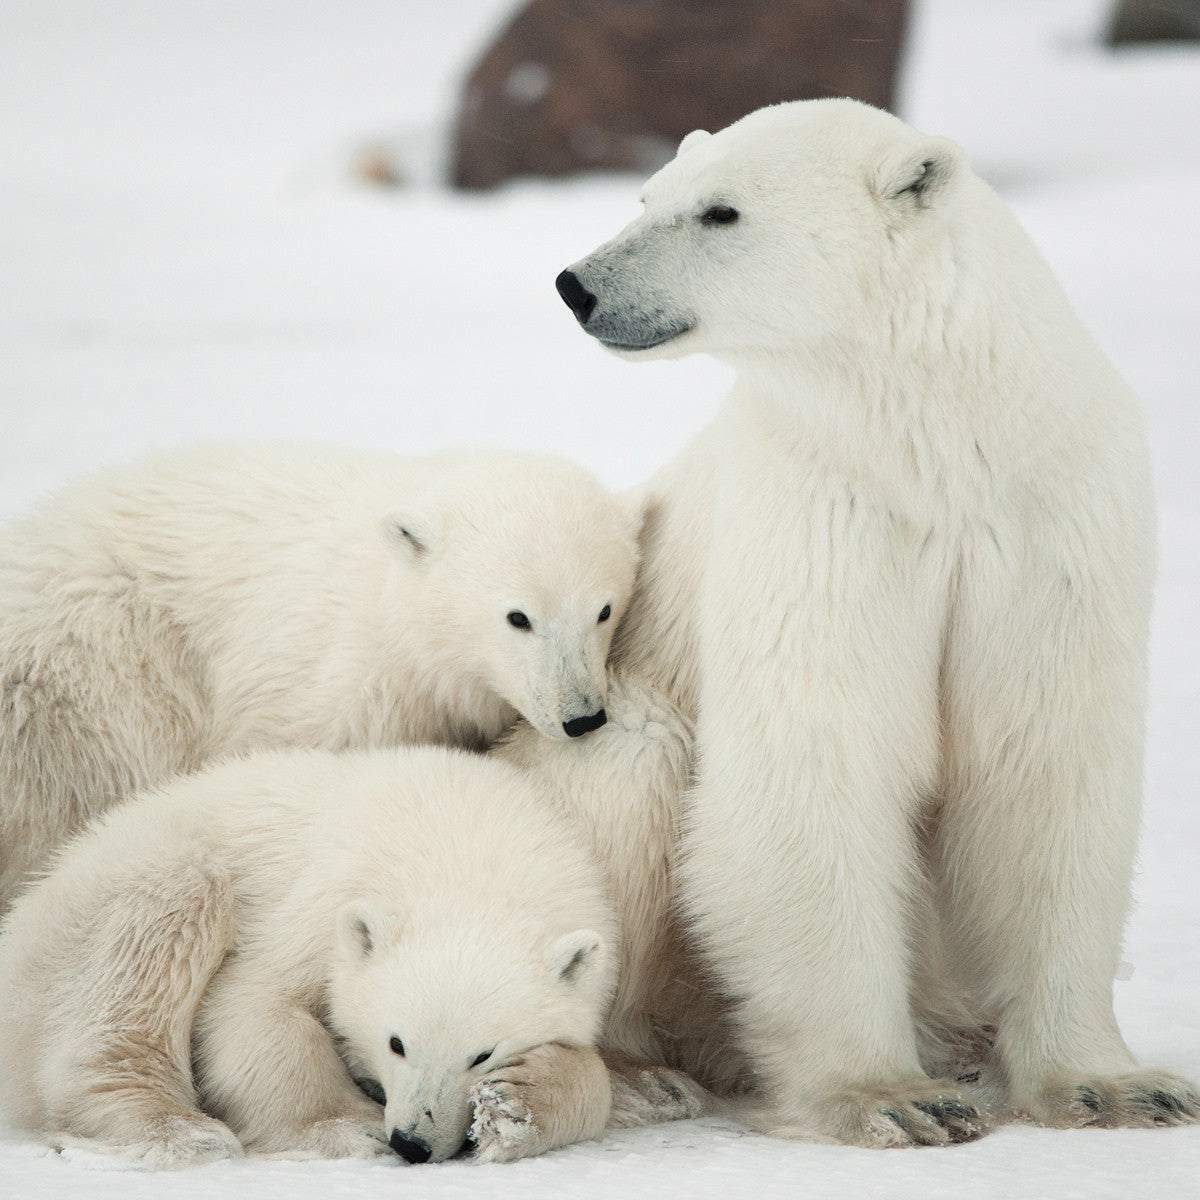 Famille d’ours polaires - WWF-Canada